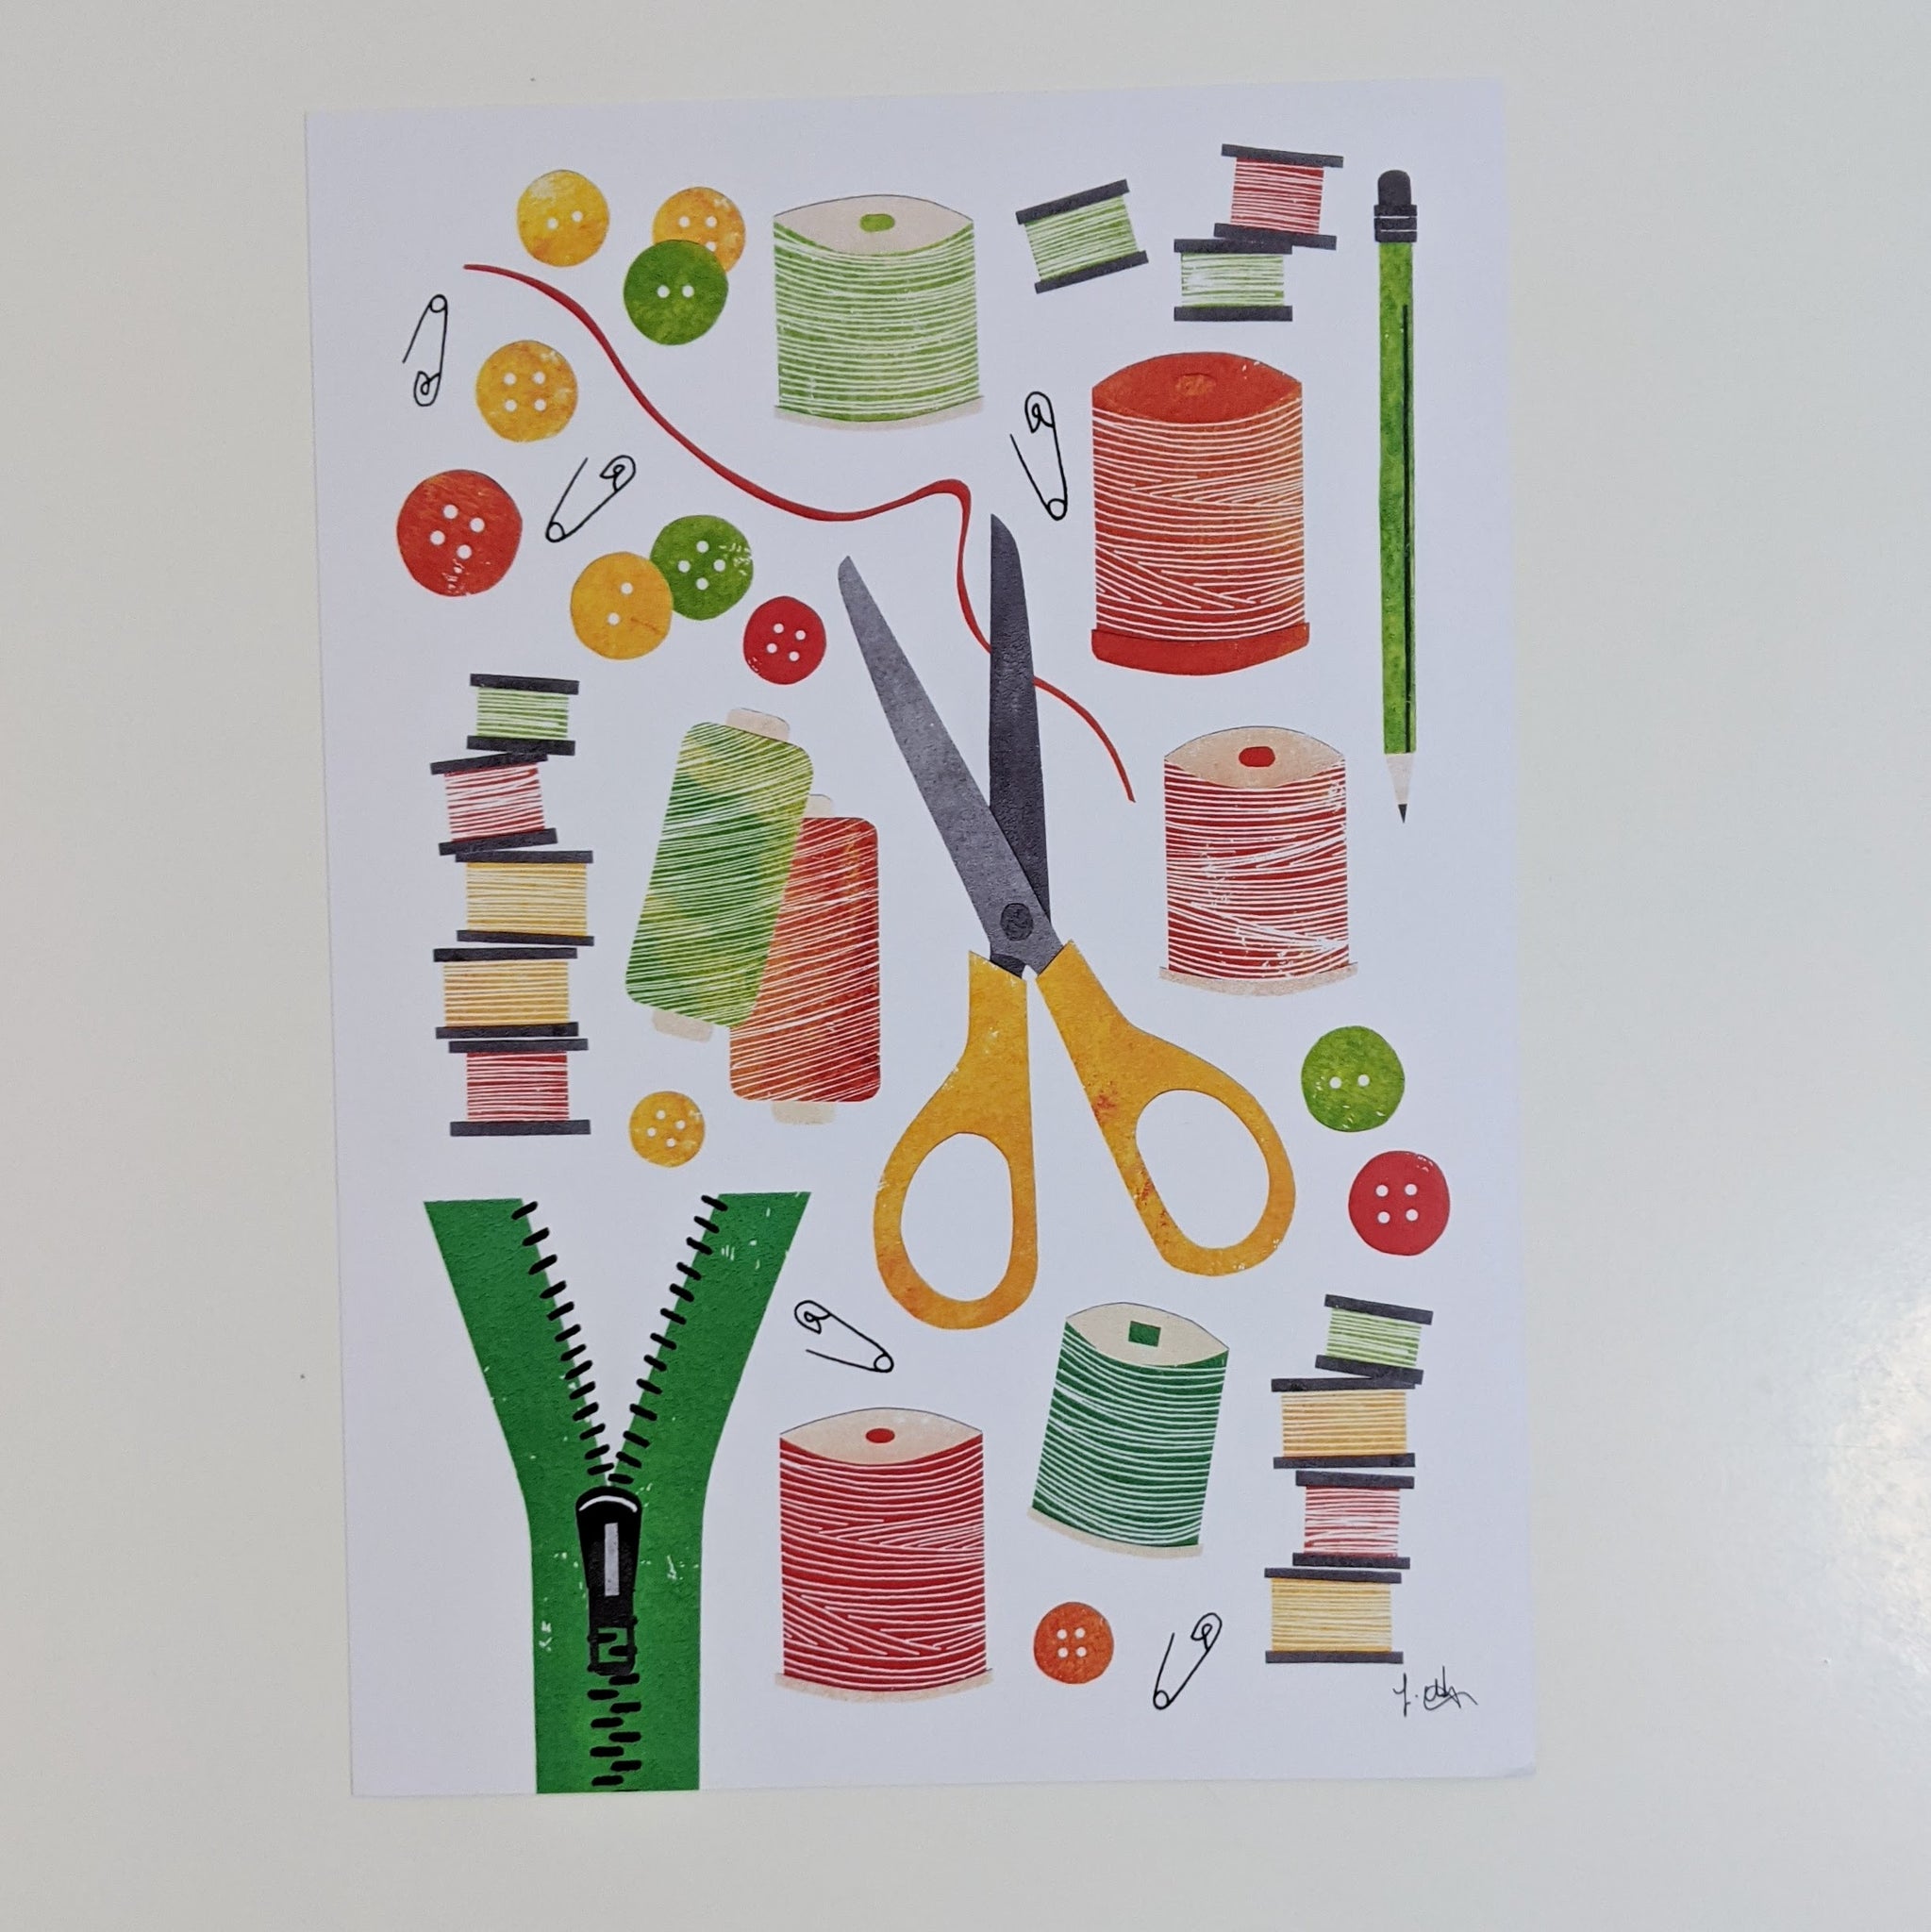 All Things Sewing art A4 print - Fiona Clabon Illustration